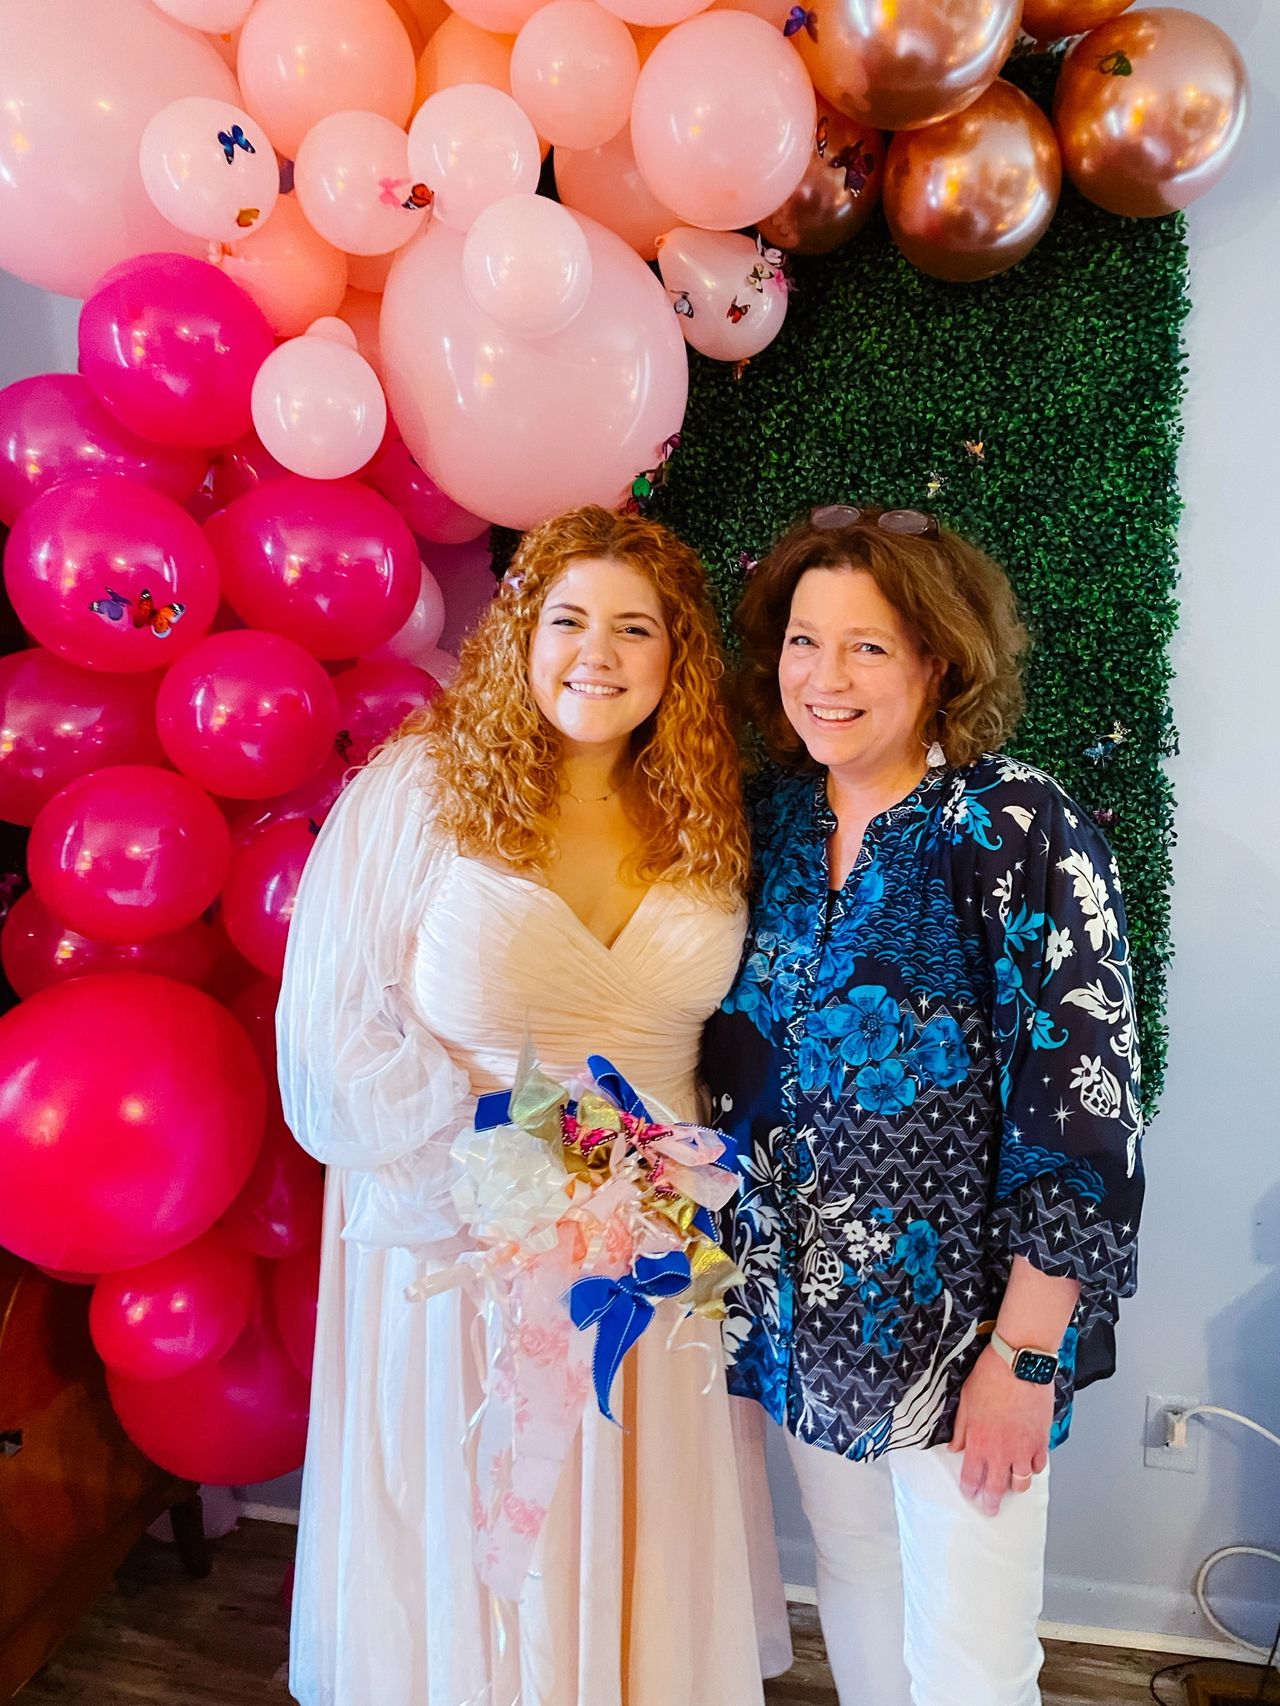 Nana Jana and her daughter, Claire Keathley, the bride-to-be as well as an awesome photographer. Thank you to Claire for these amazing photos.